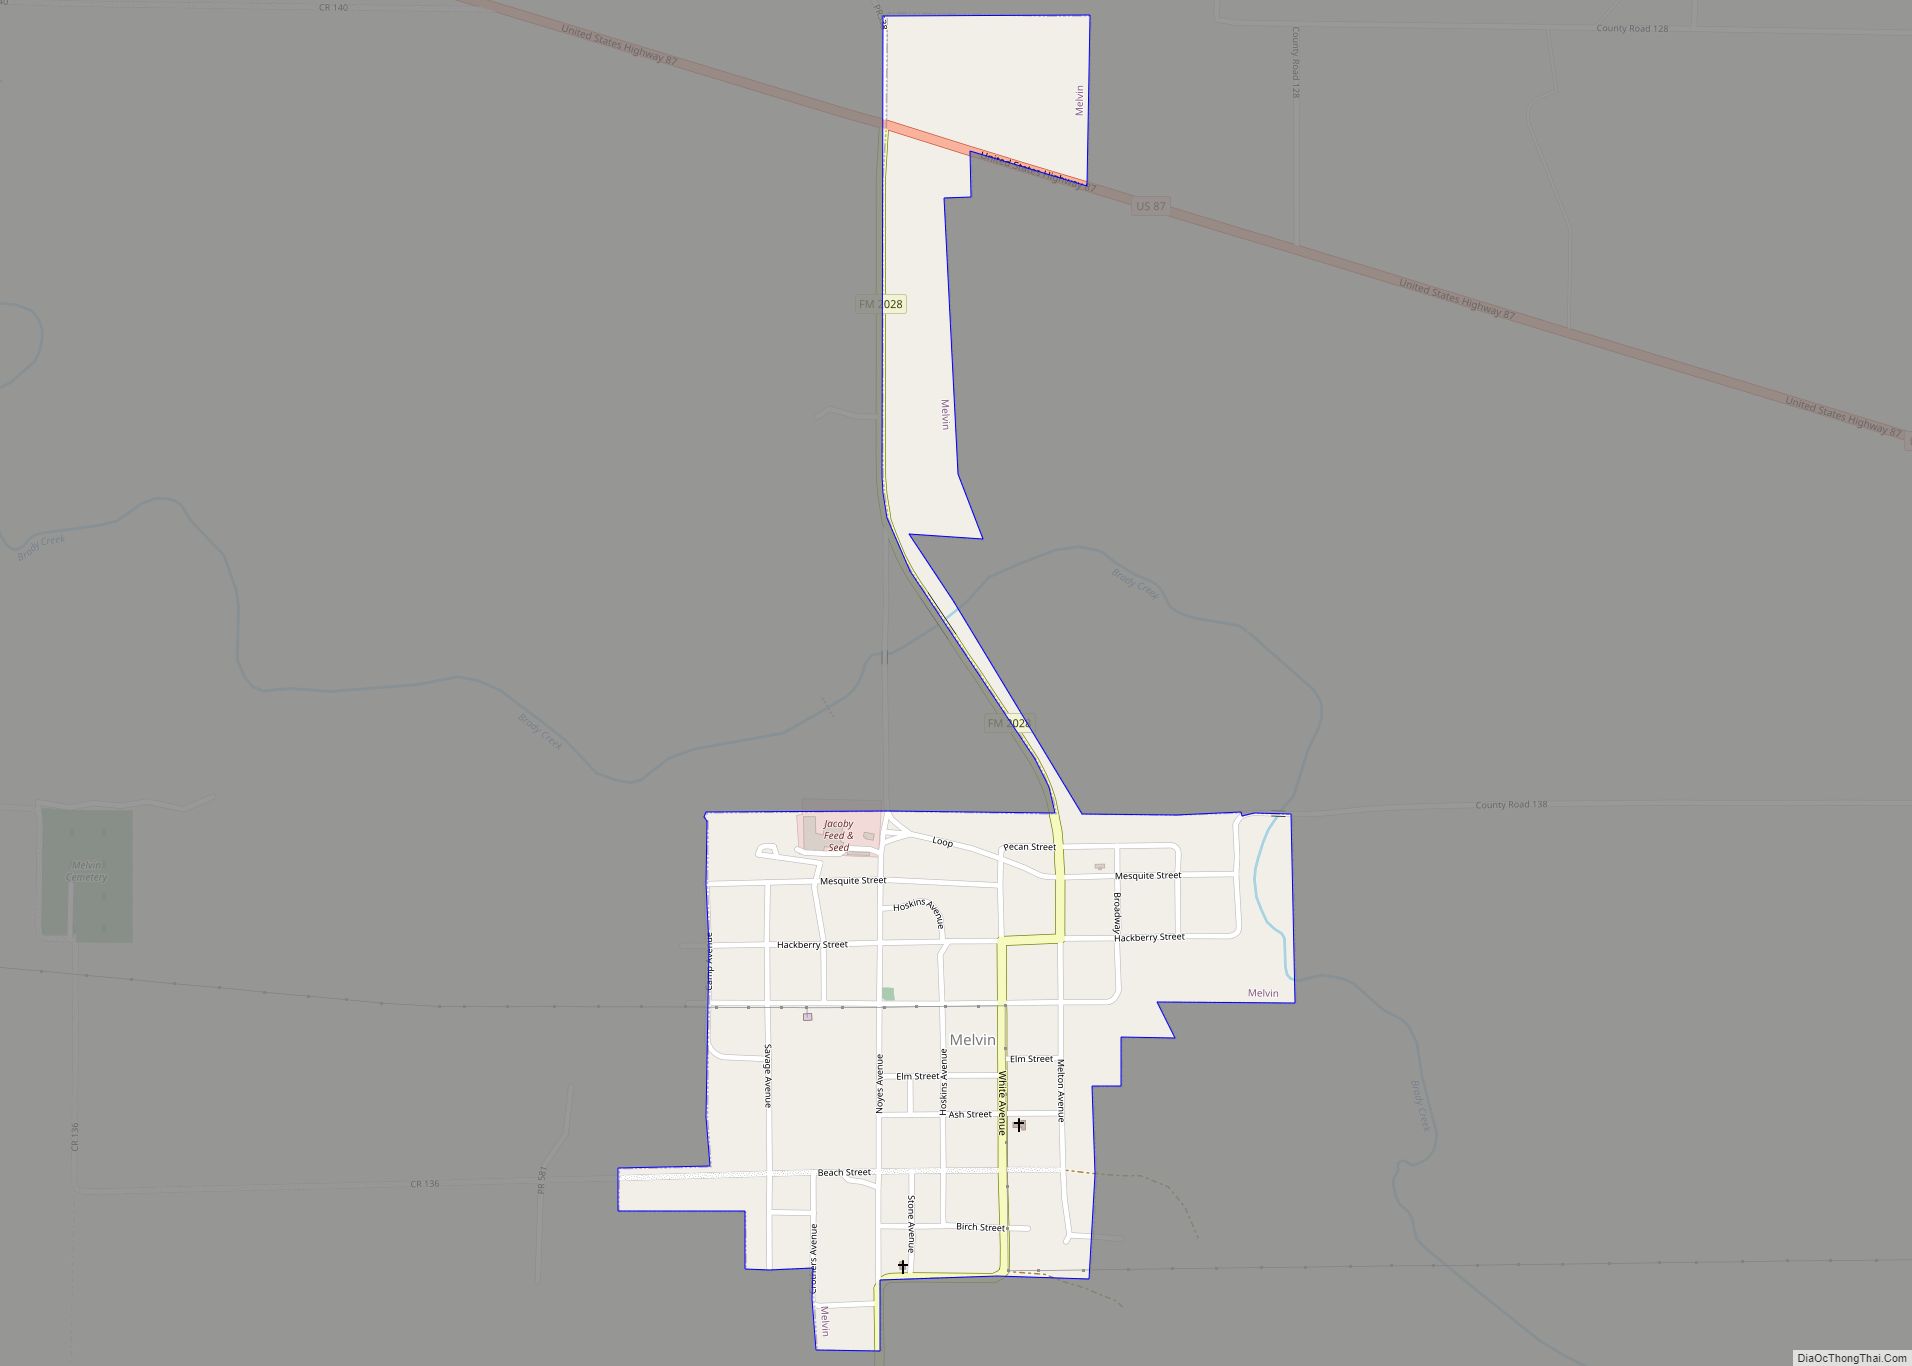 Map of Melvin town, Texas